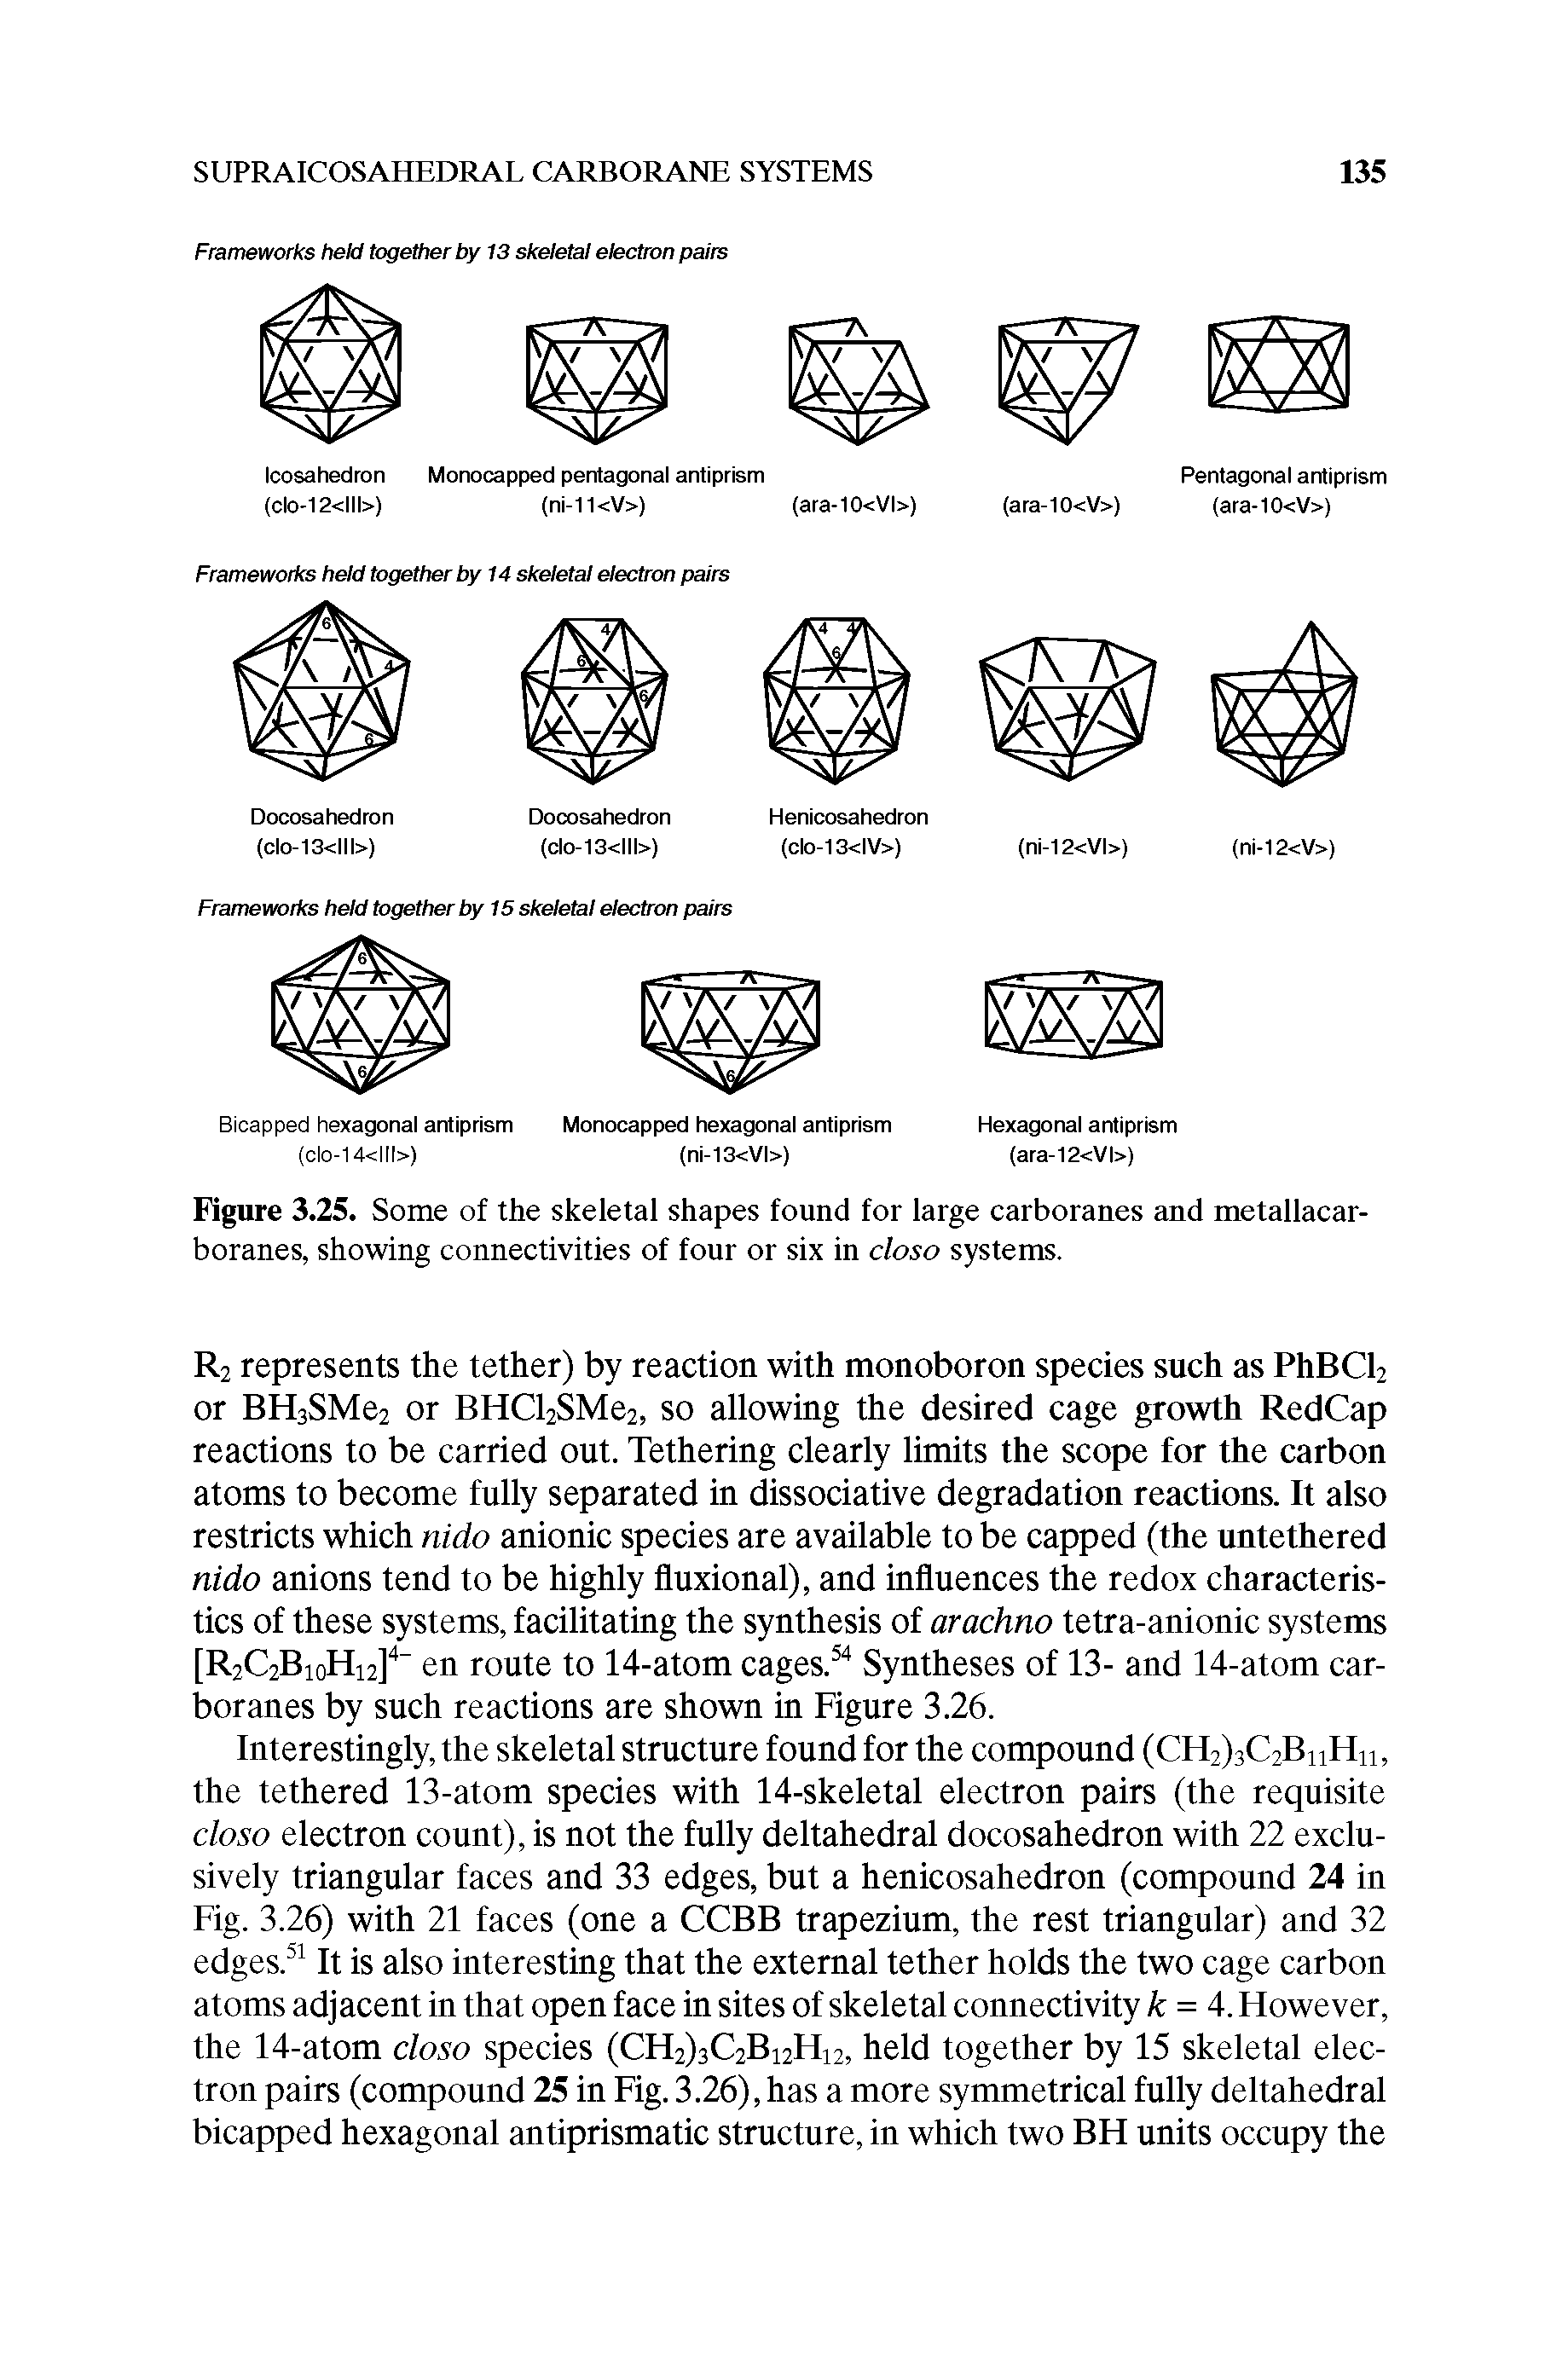 Figure 3.25. Some of the skeletal shapes found for large carboranes and metallacarboranes, showing connectivities of four or six in closo systems.